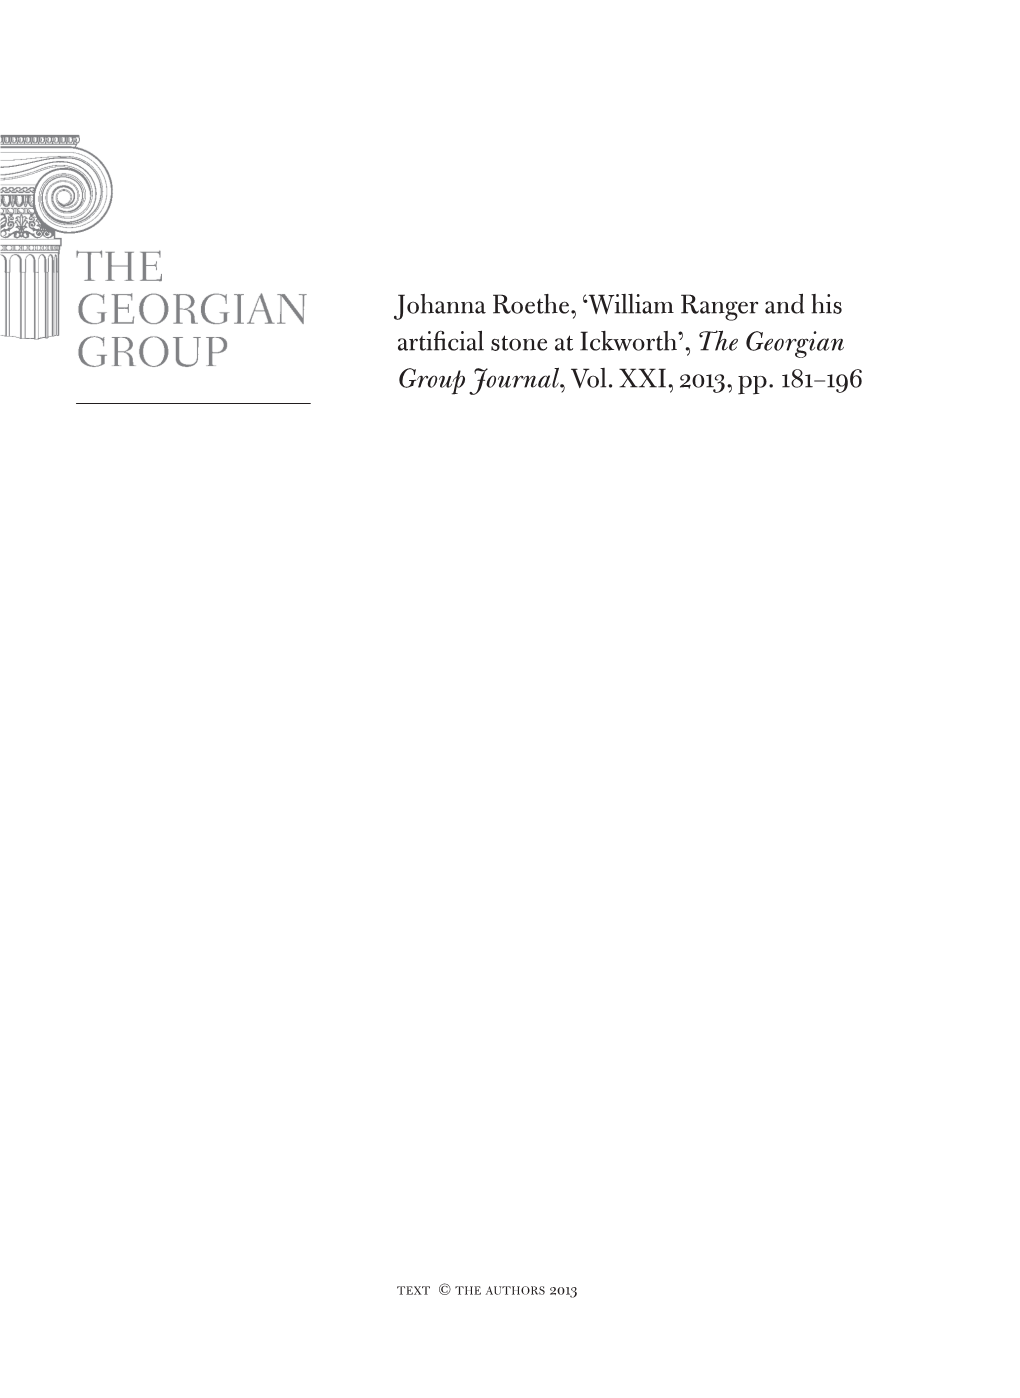 Johanna Roethe, 'William Ranger and His Artificial Stone at Ickworth', the Georgian Group Journal, Vol. Xxi, 2013, Pp